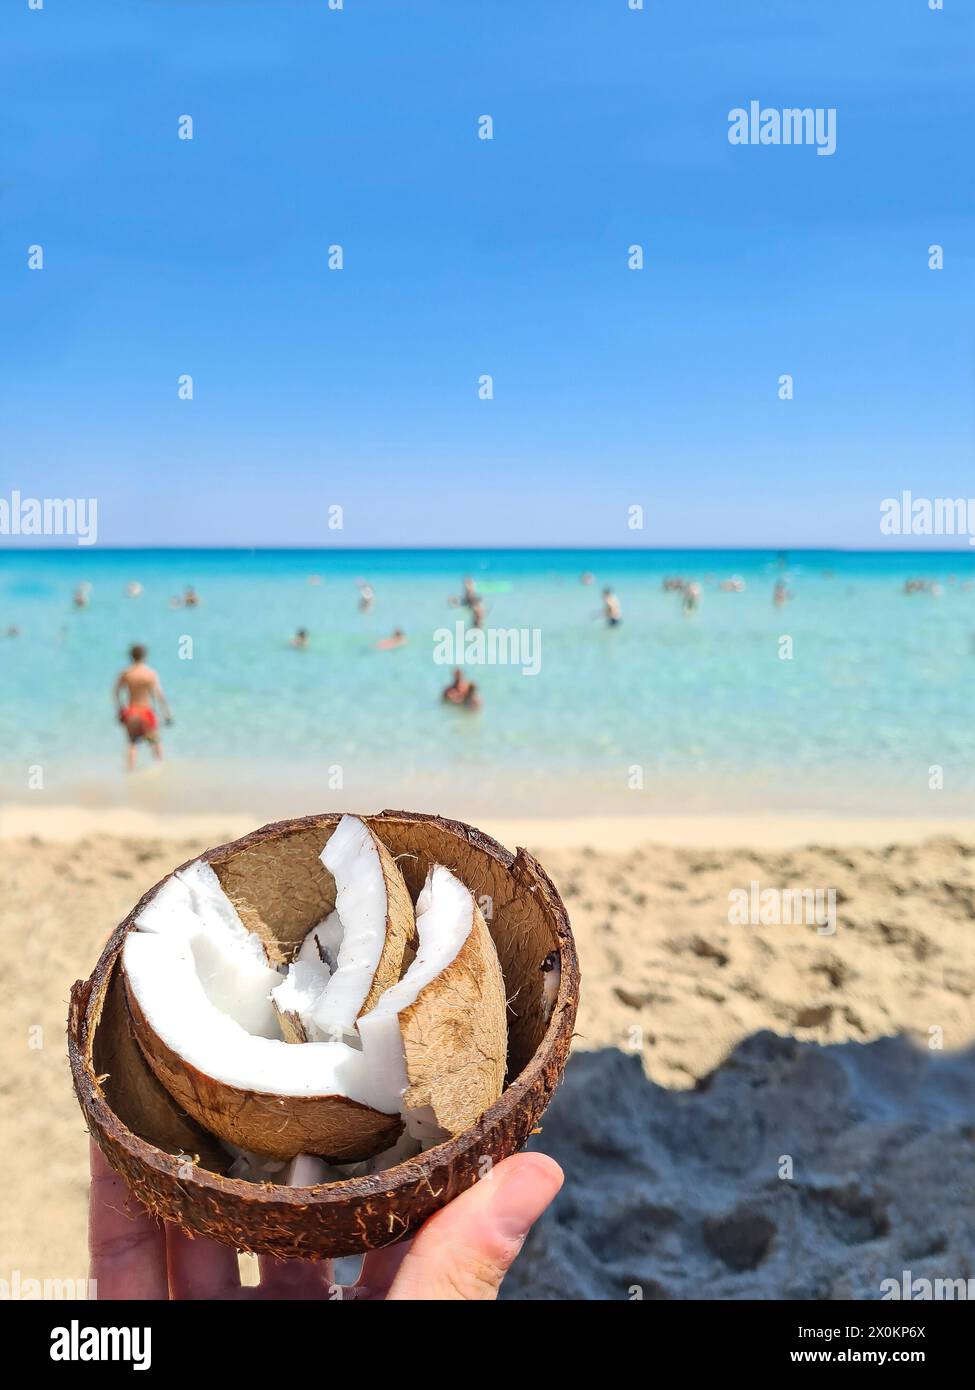 A woman's hand holds an open coconut with shell in the foreground, typical snack on the beach during summer vacation in Mallorca, Spain Stock Photo